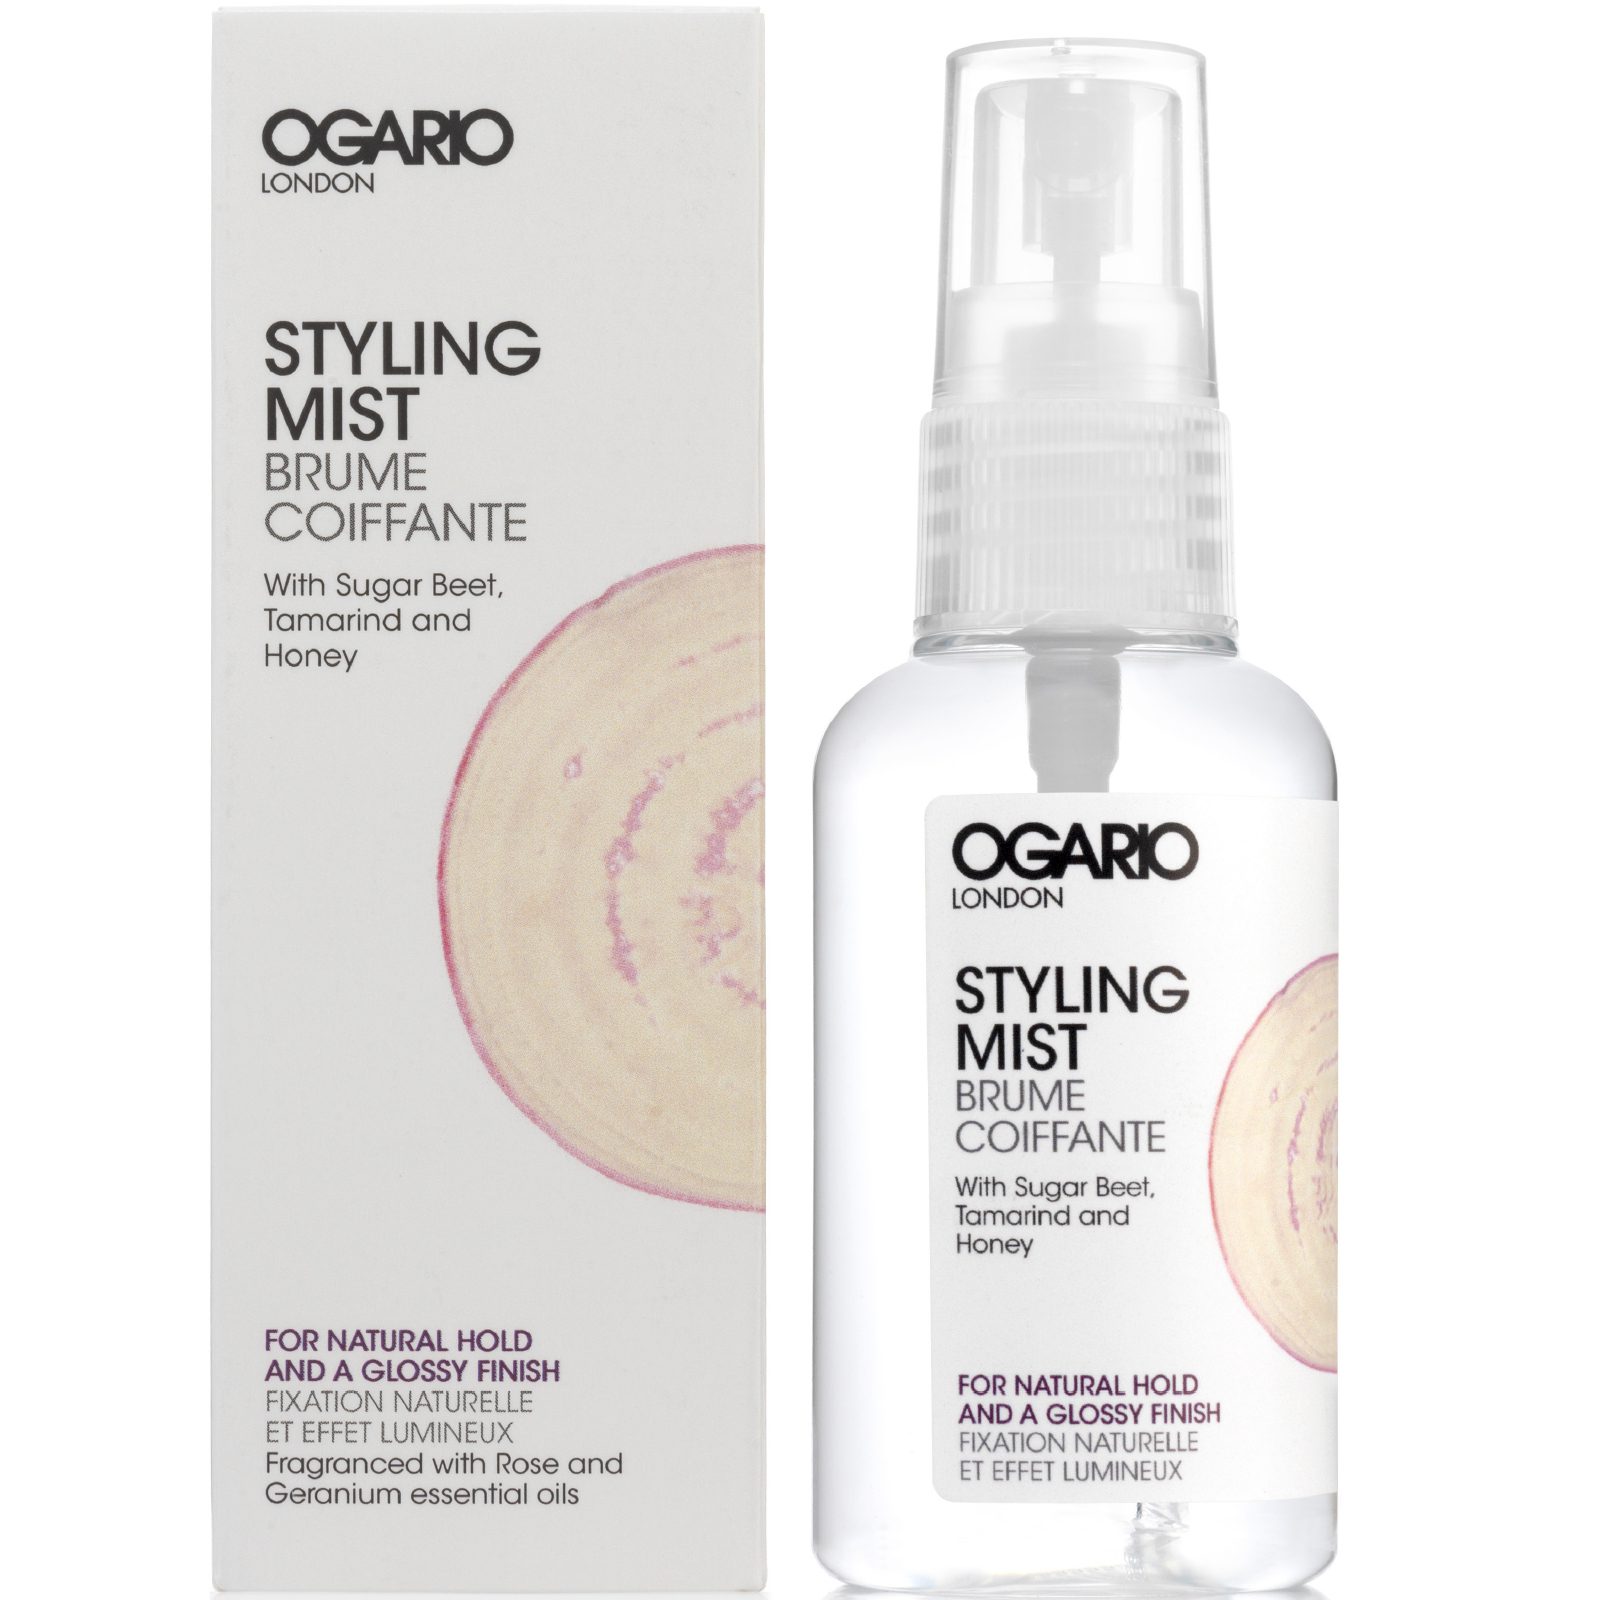 Styling Mist for Glossy Finish; with Argan Oil. Best for adding shine and moisture to hair.